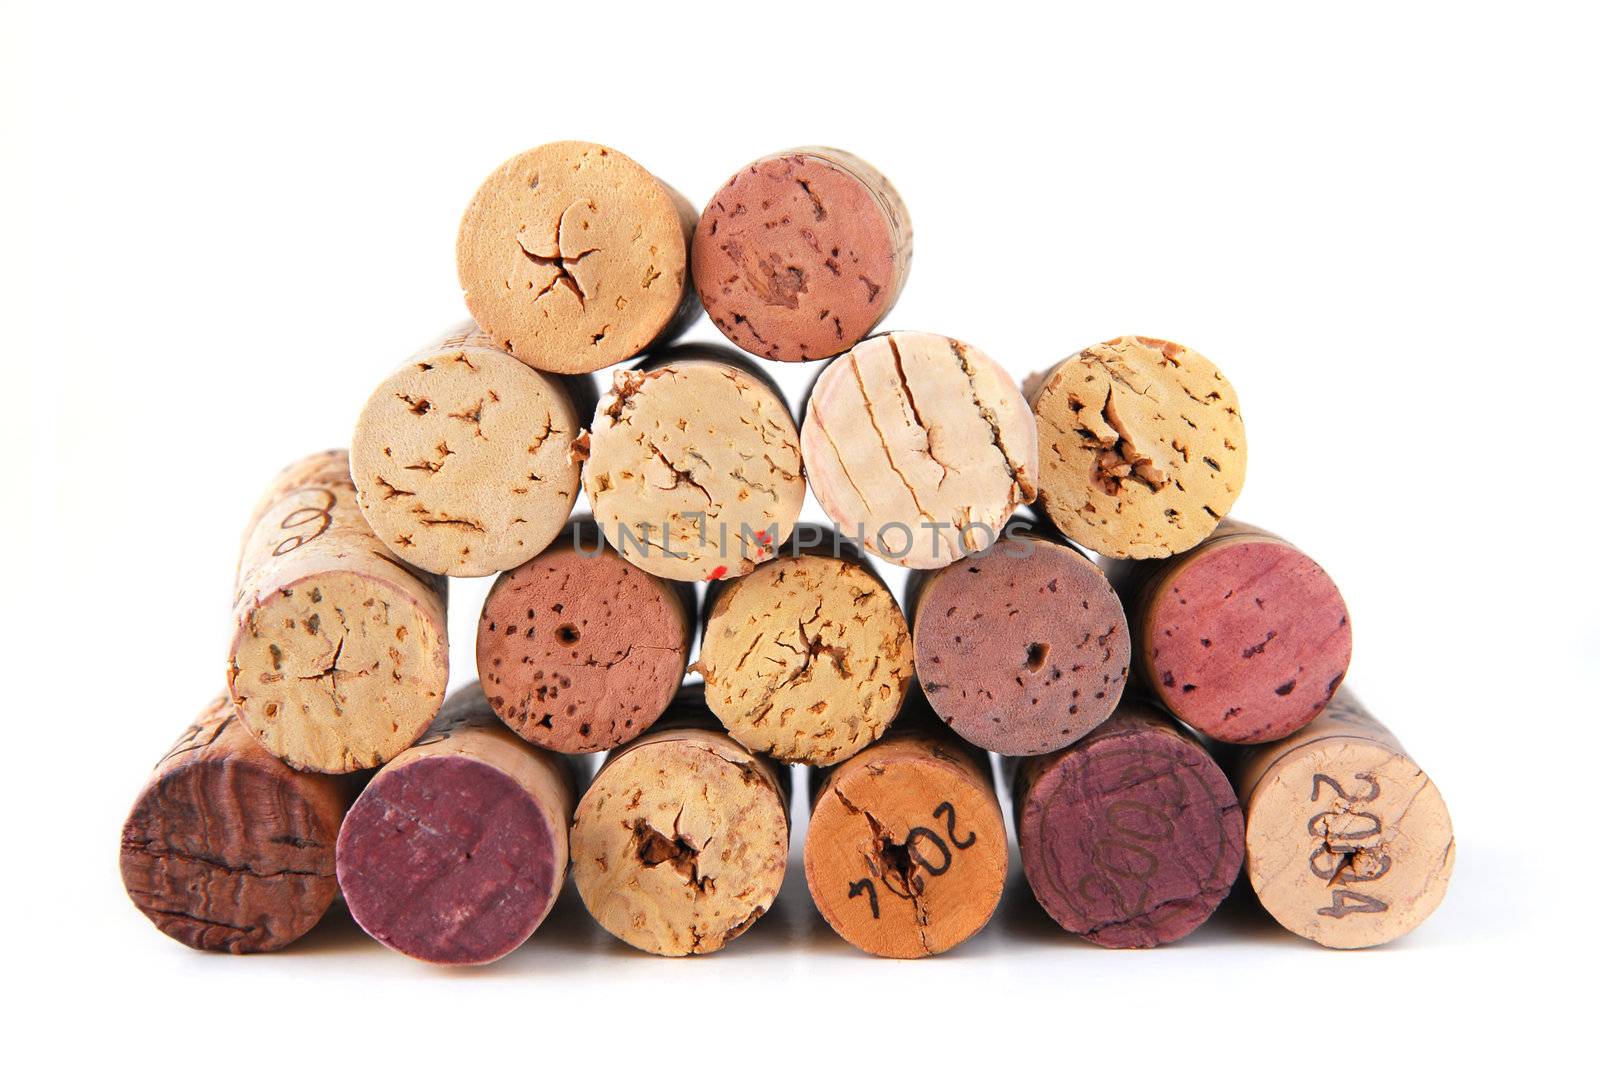 A pile of various wine corks on white background